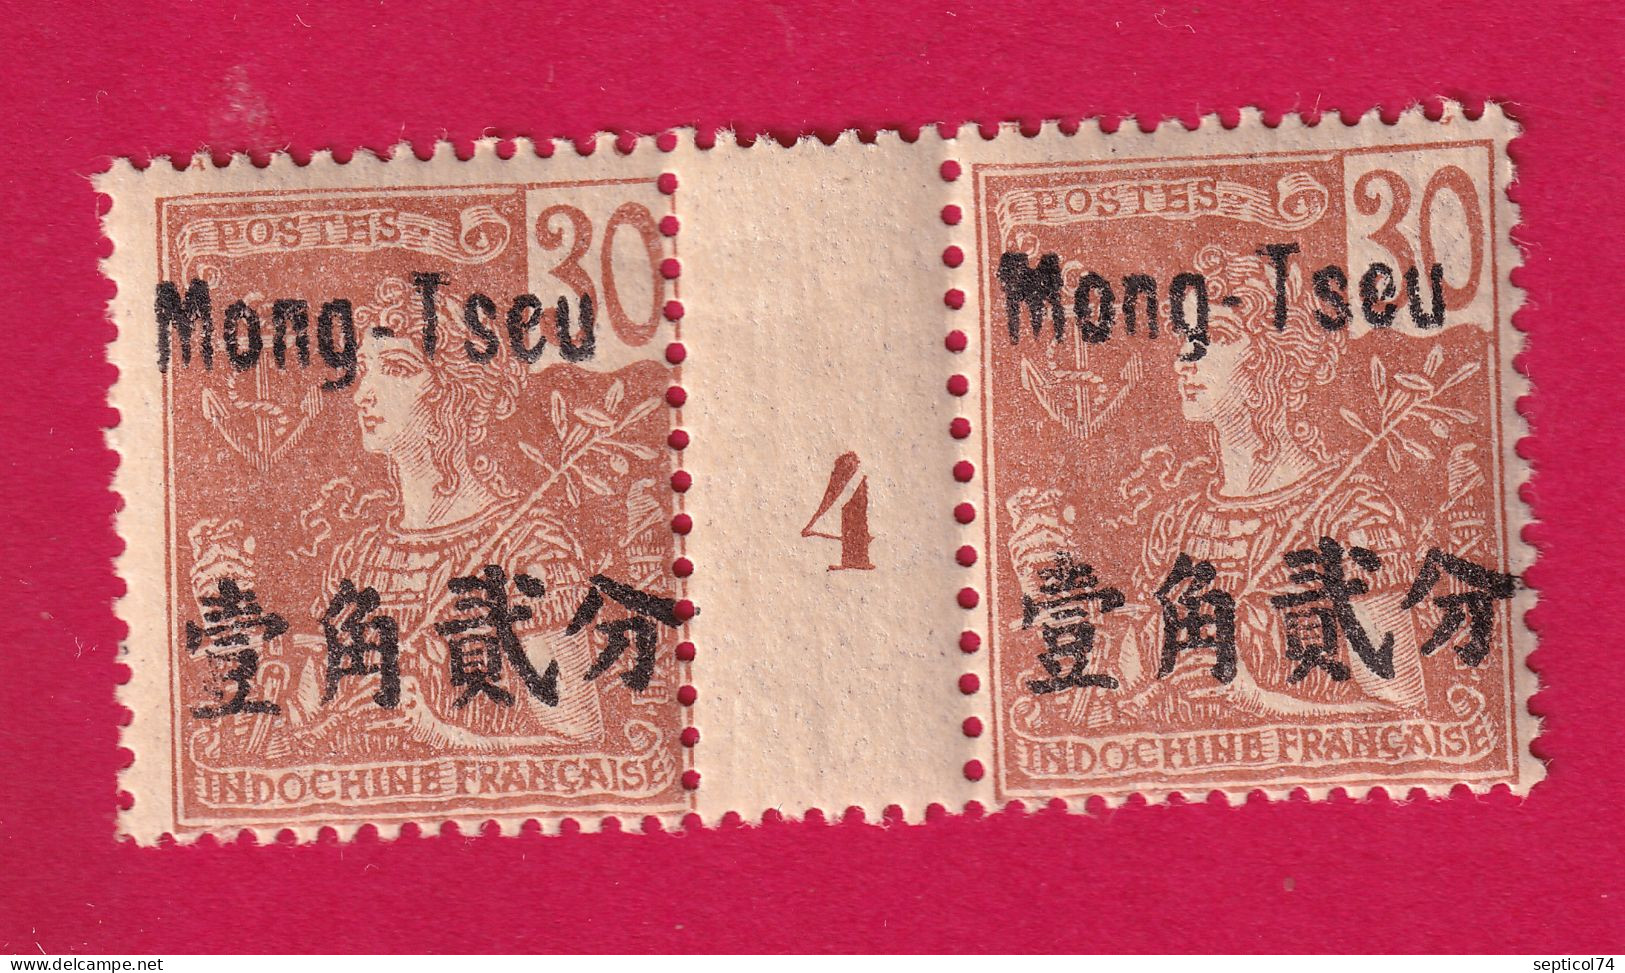 MONG TZEU CHINE N°25 PAIRE MILLESIME 4 NEUF TIMBRE STAMP BRIEFMARKEN CHINA - Unused Stamps